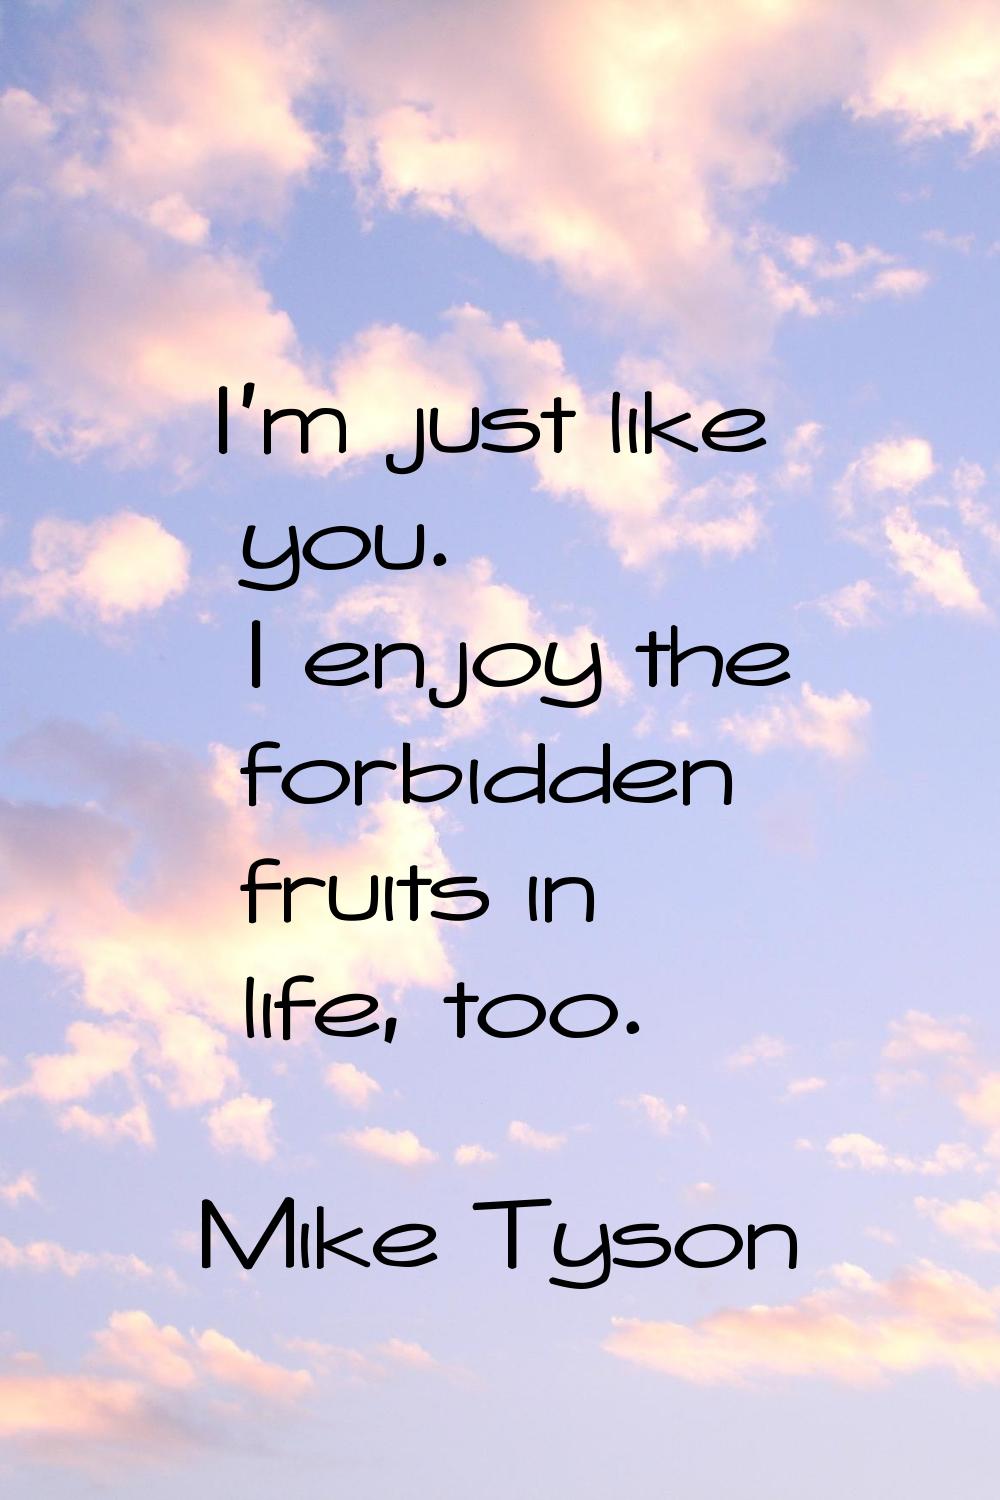 I'm just like you. I enjoy the forbidden fruits in life, too.